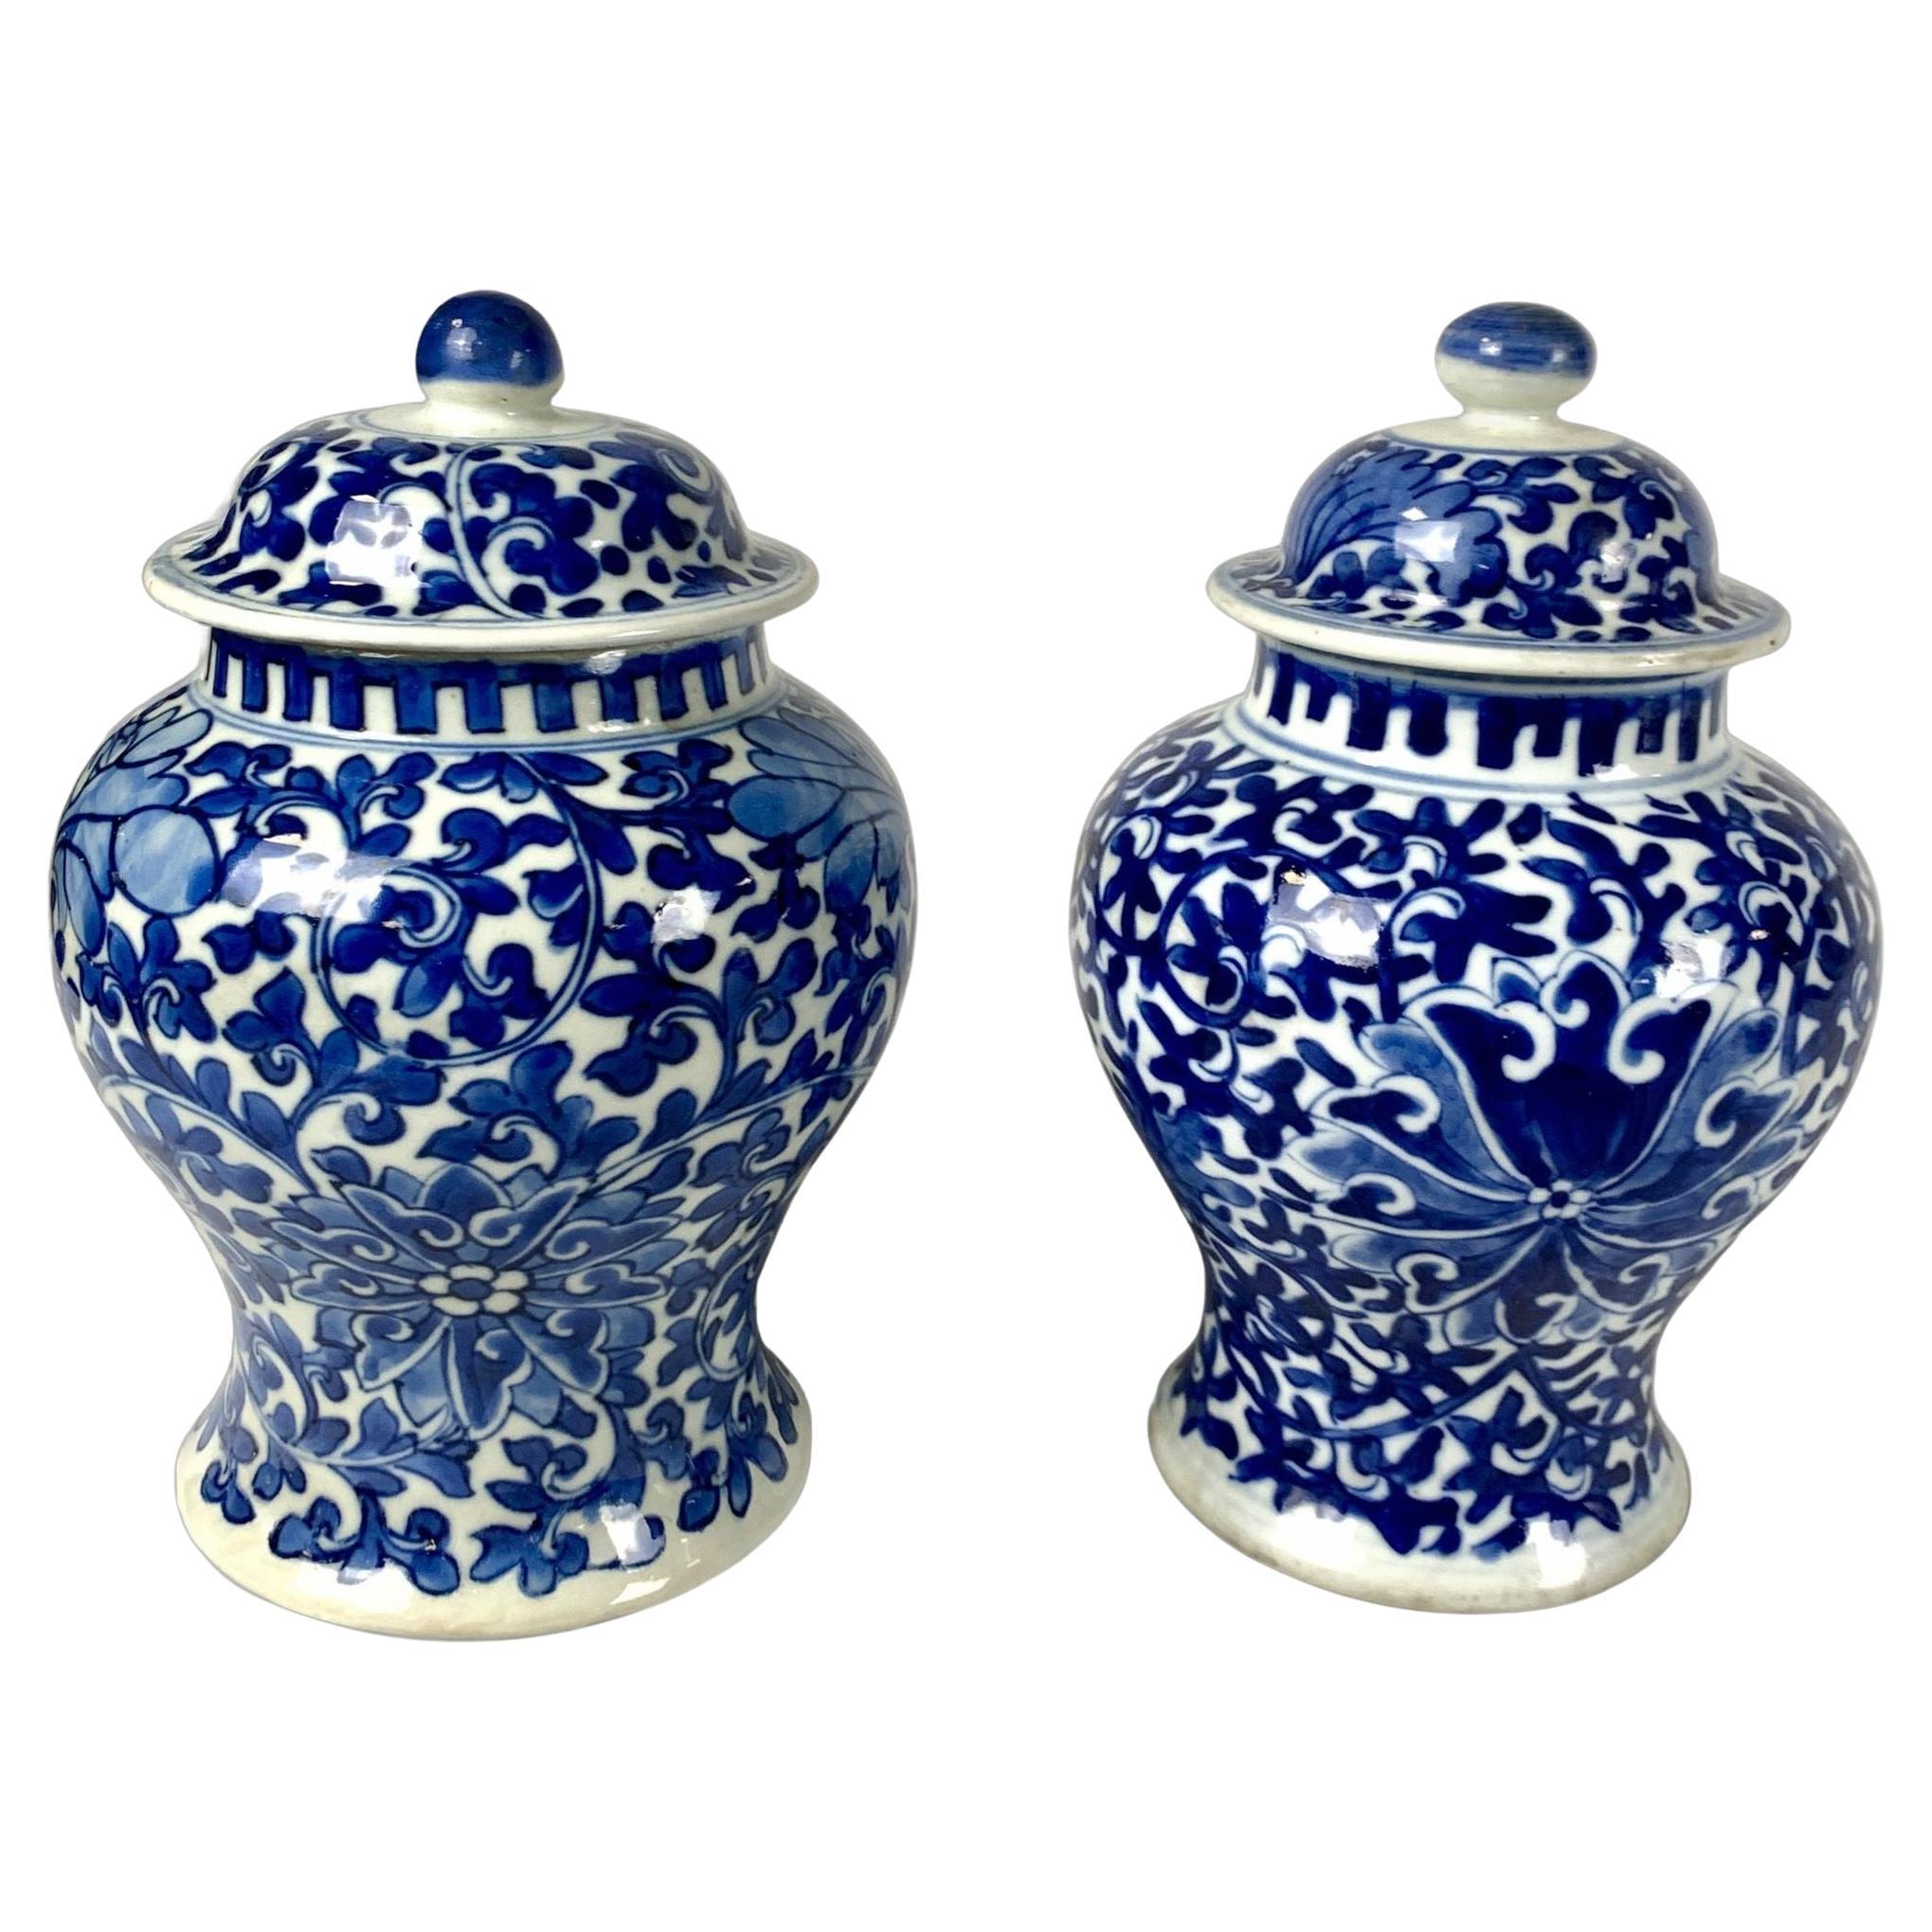 Pair Blue and White Chinese Jars Qing Dynasty Circa 1870